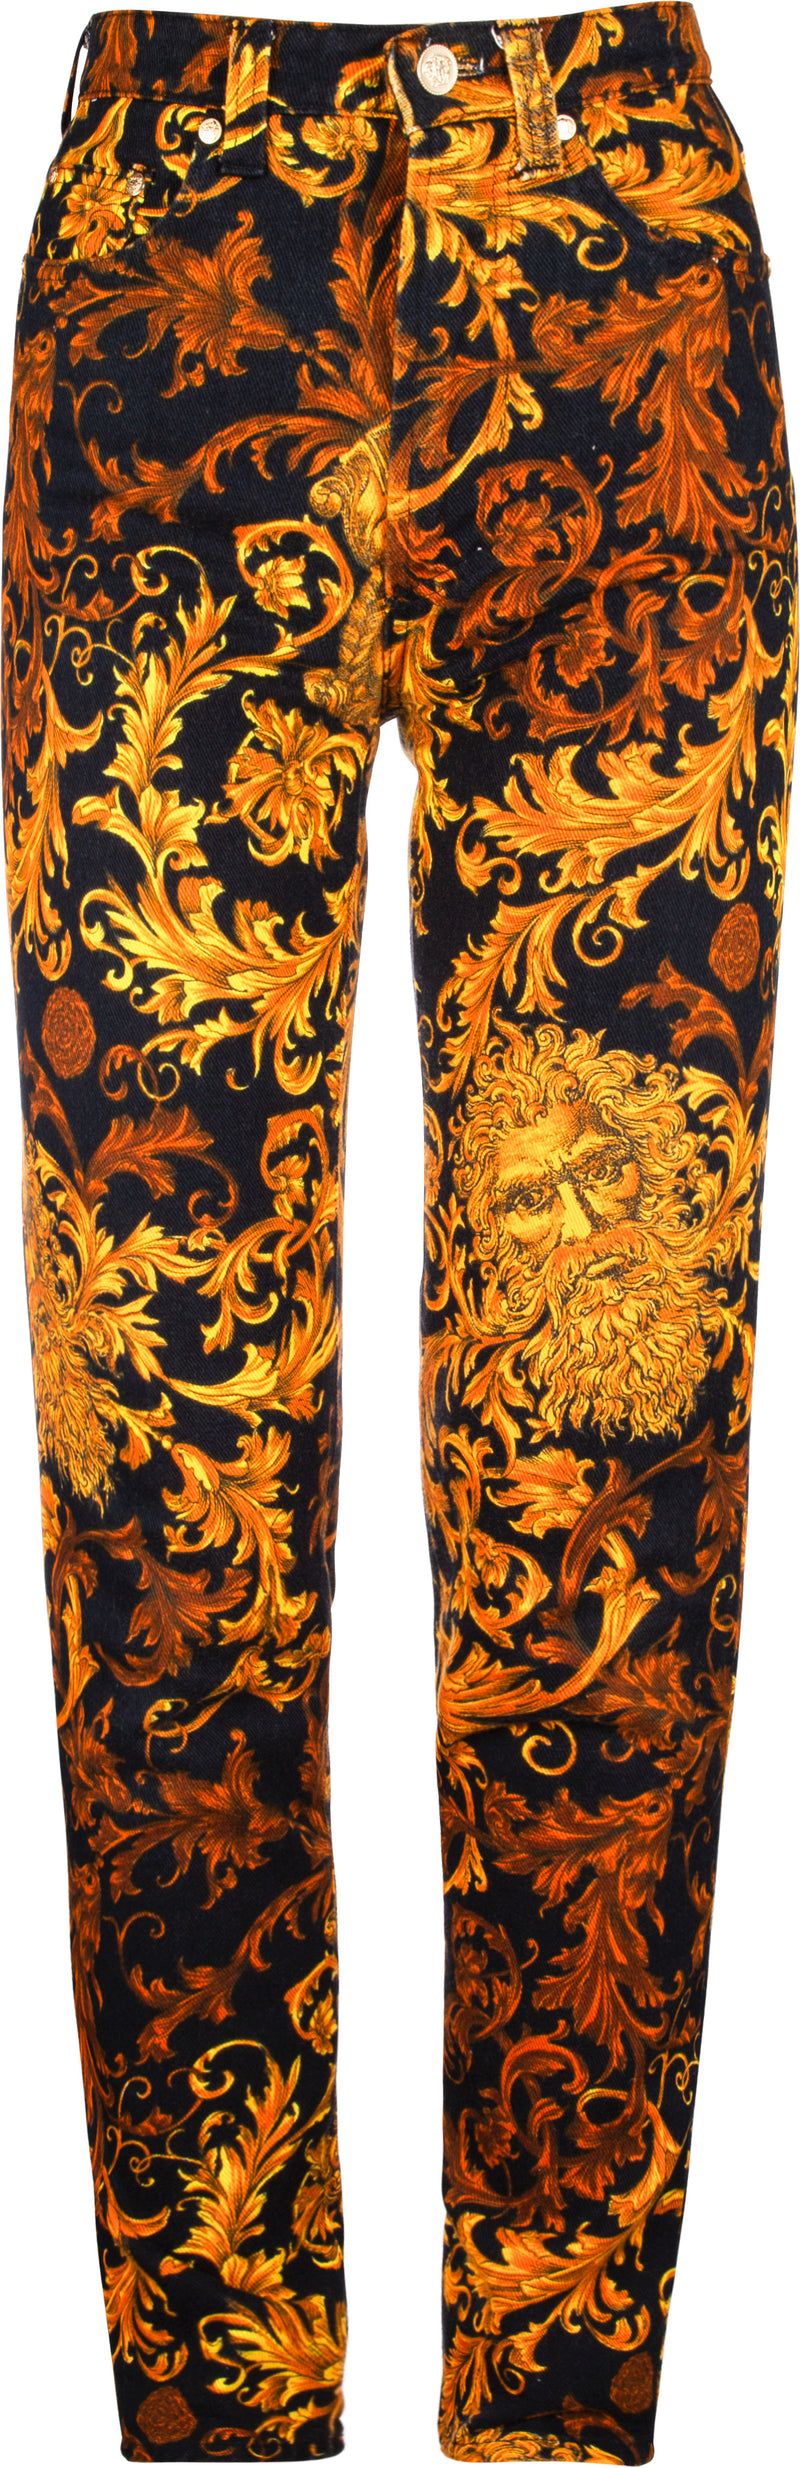 Gianni Versace Baroque Jeans